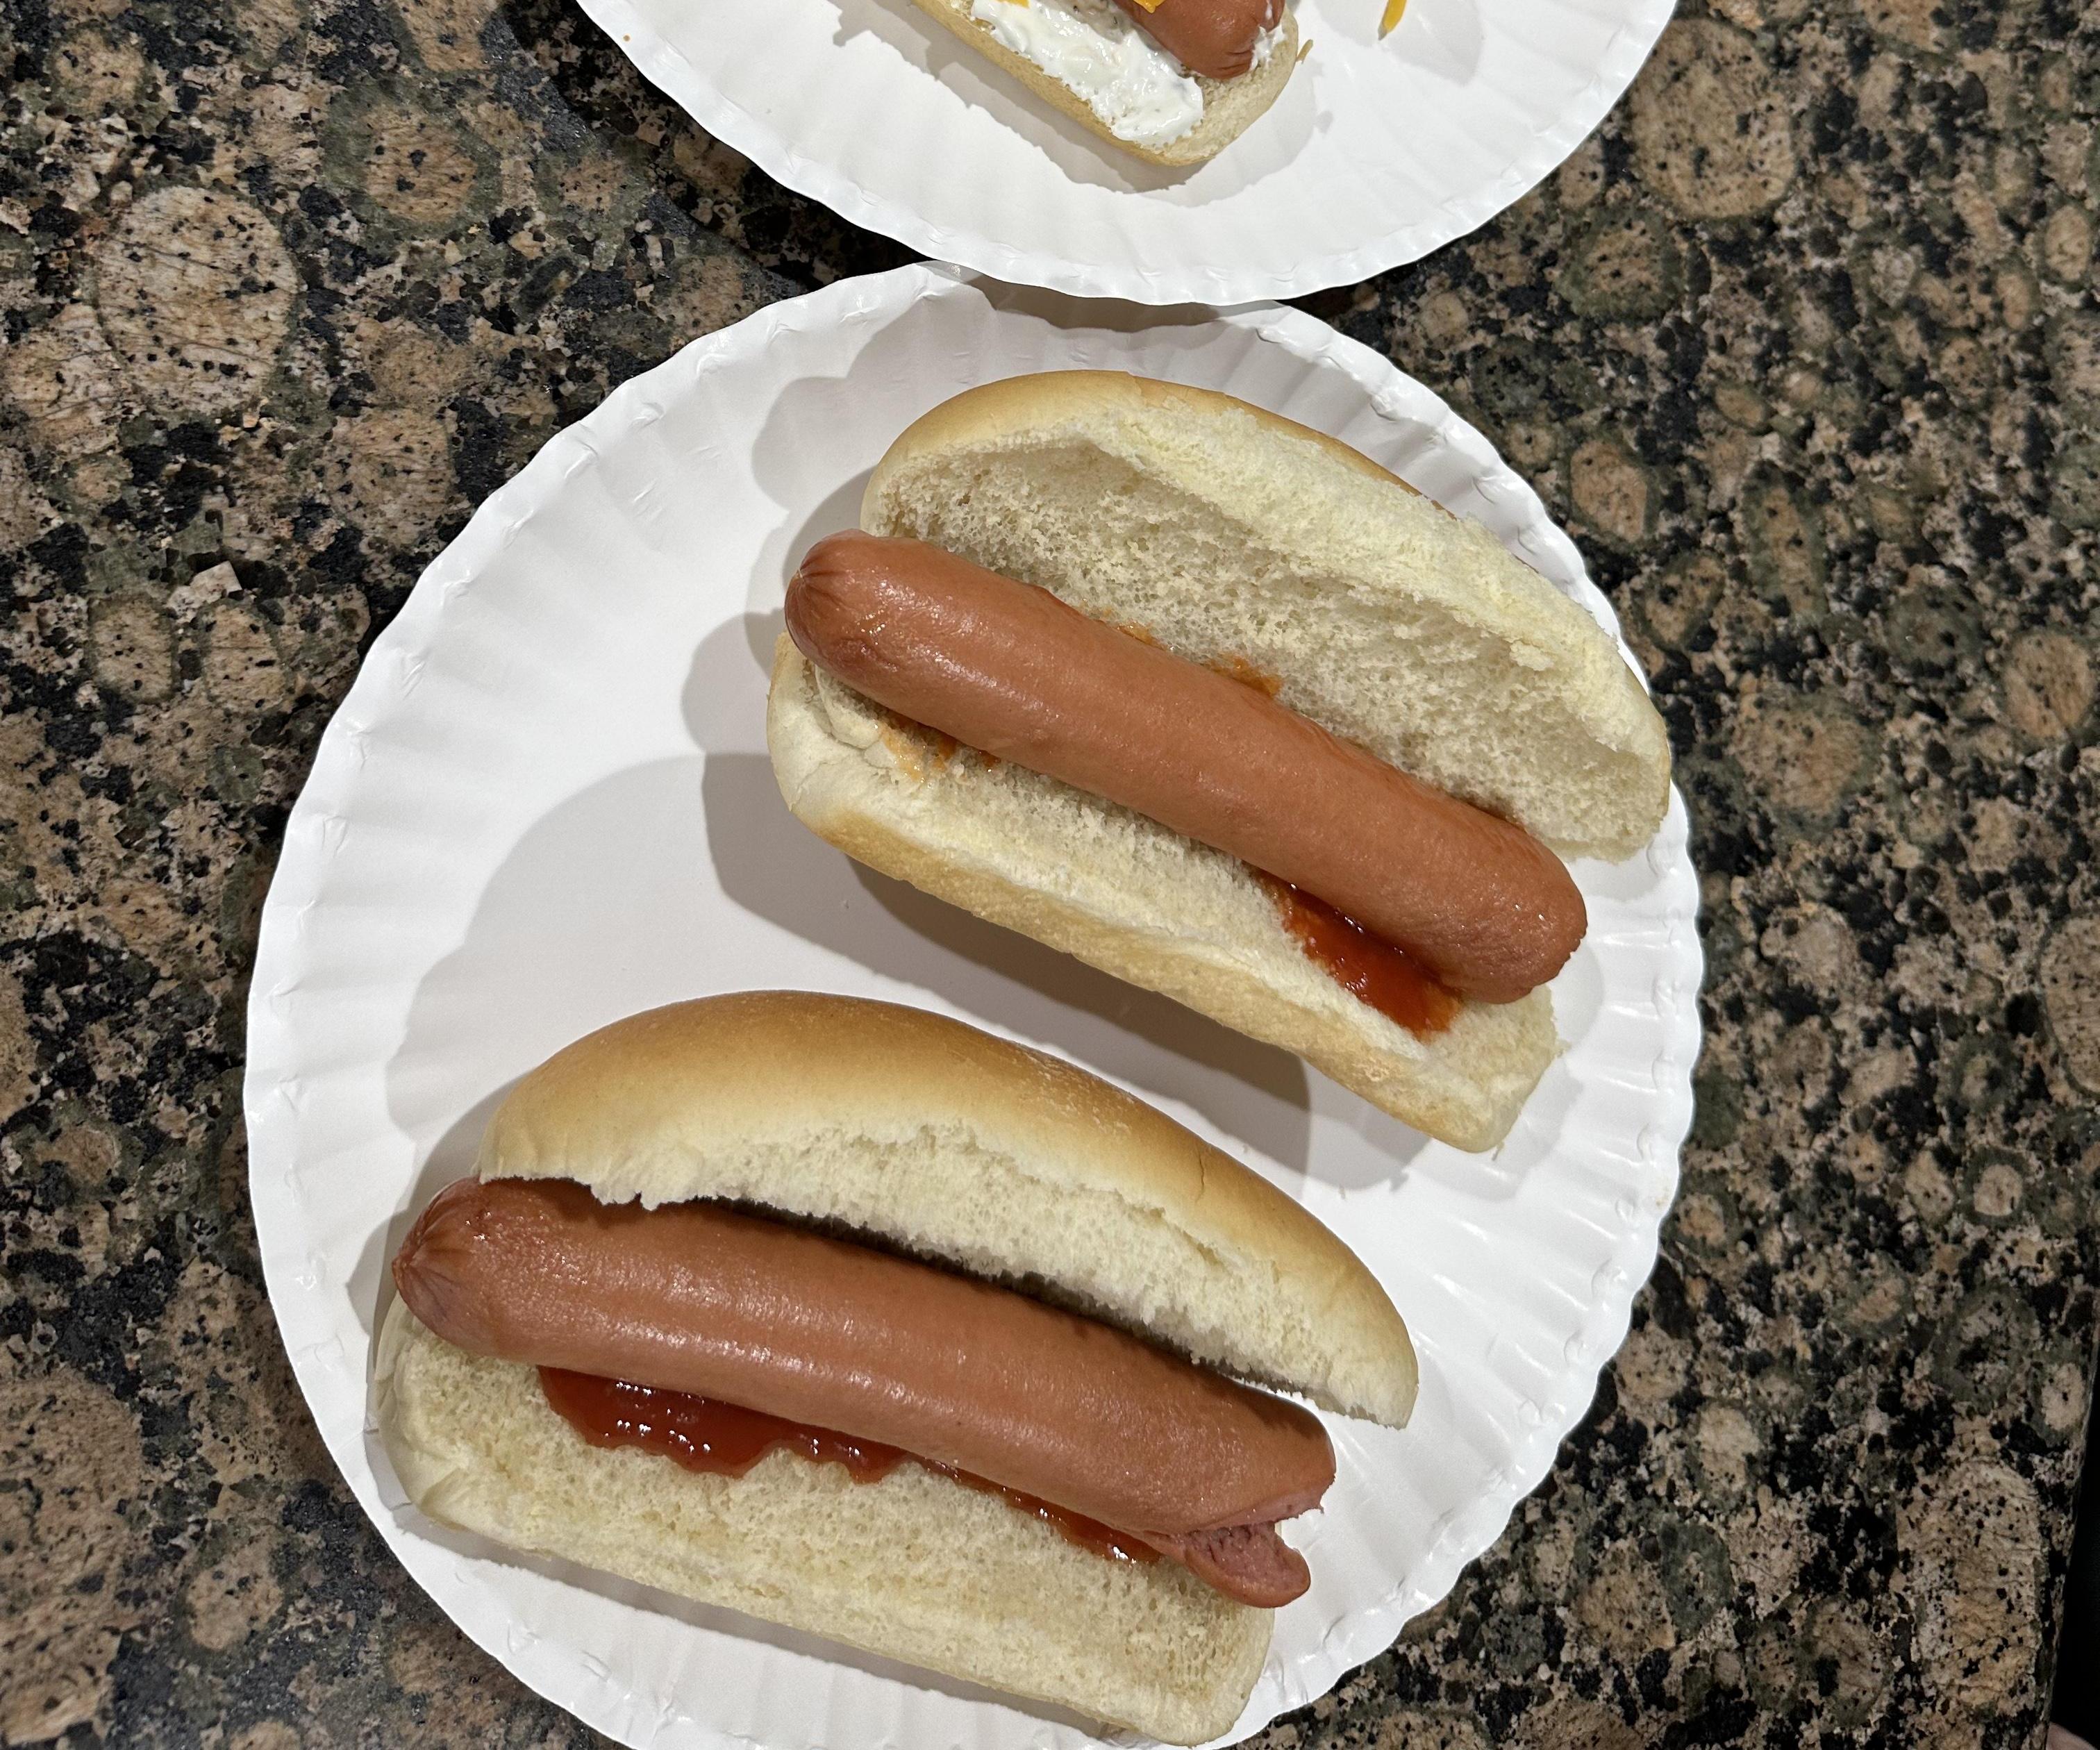 How to Make Delicious Hot Dogs